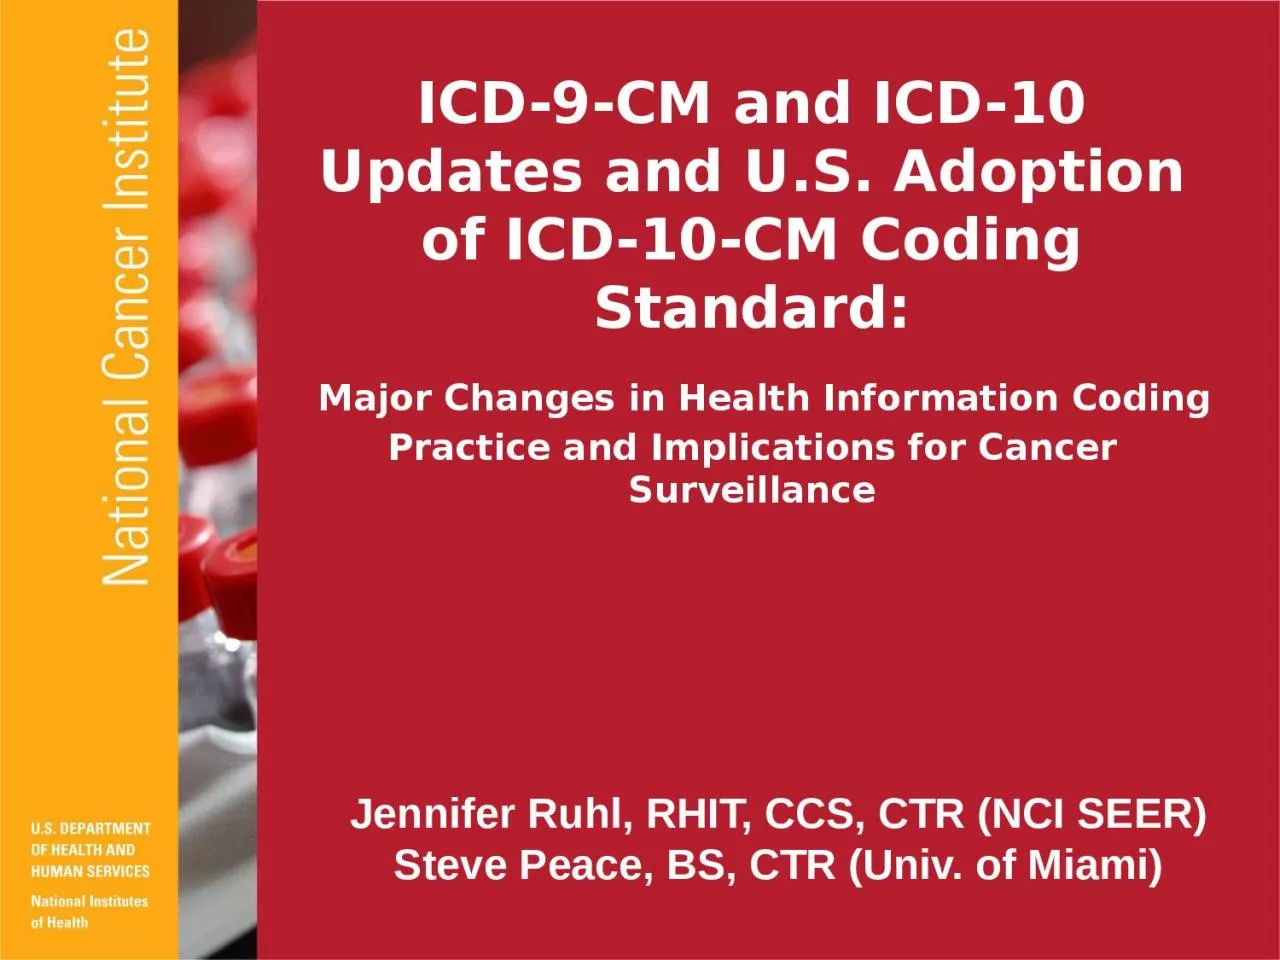 ICD-9-CM and ICD-10 Updates and U.S. Adoption of ICD-10-CM Coding Standard: